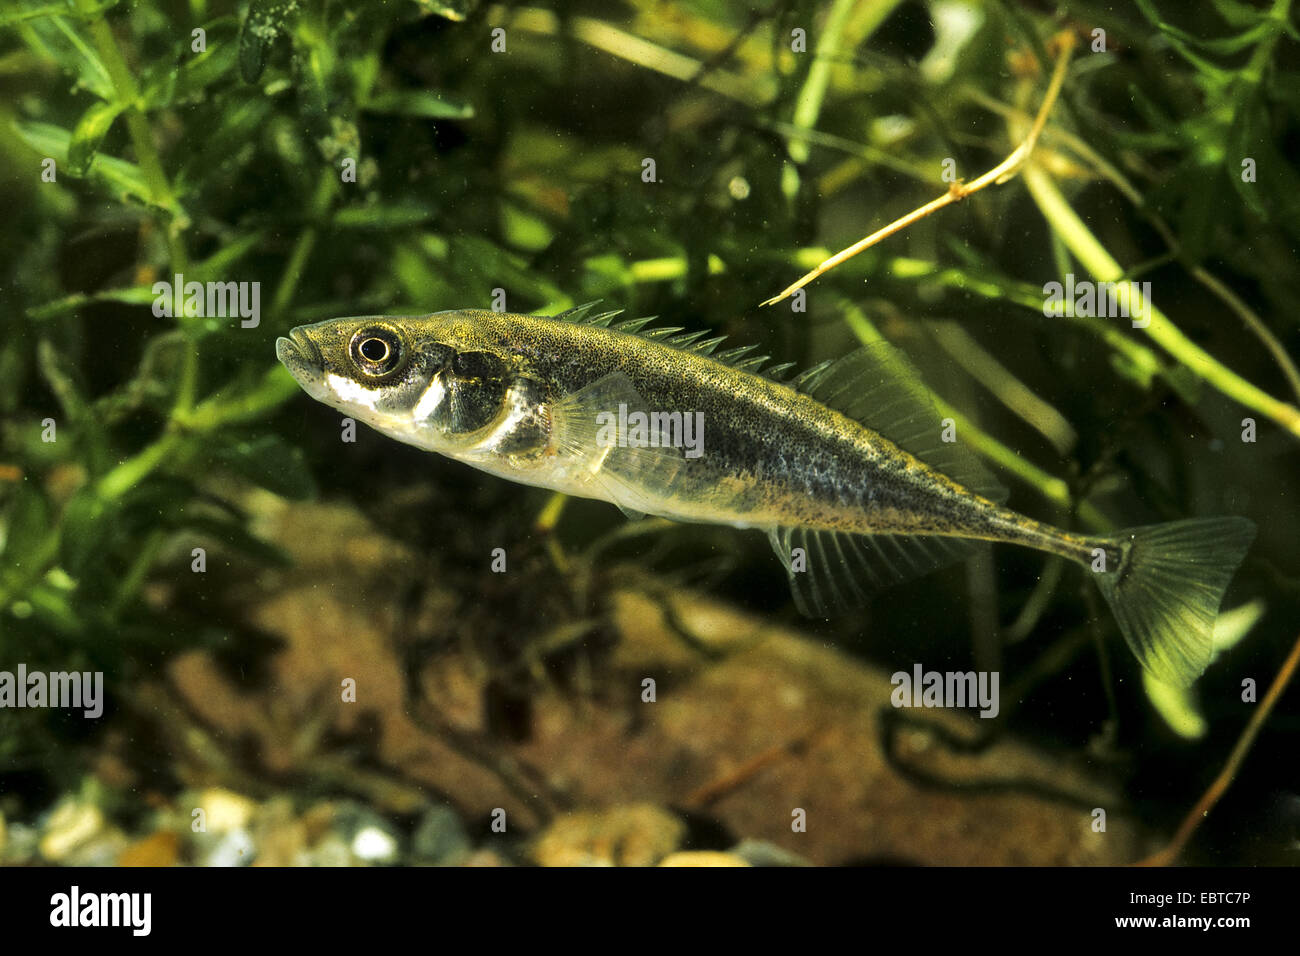 Nine-spined stickleback (Pungitius pungitius), swimming at the bottom of a water covered with gravel Stock Photo